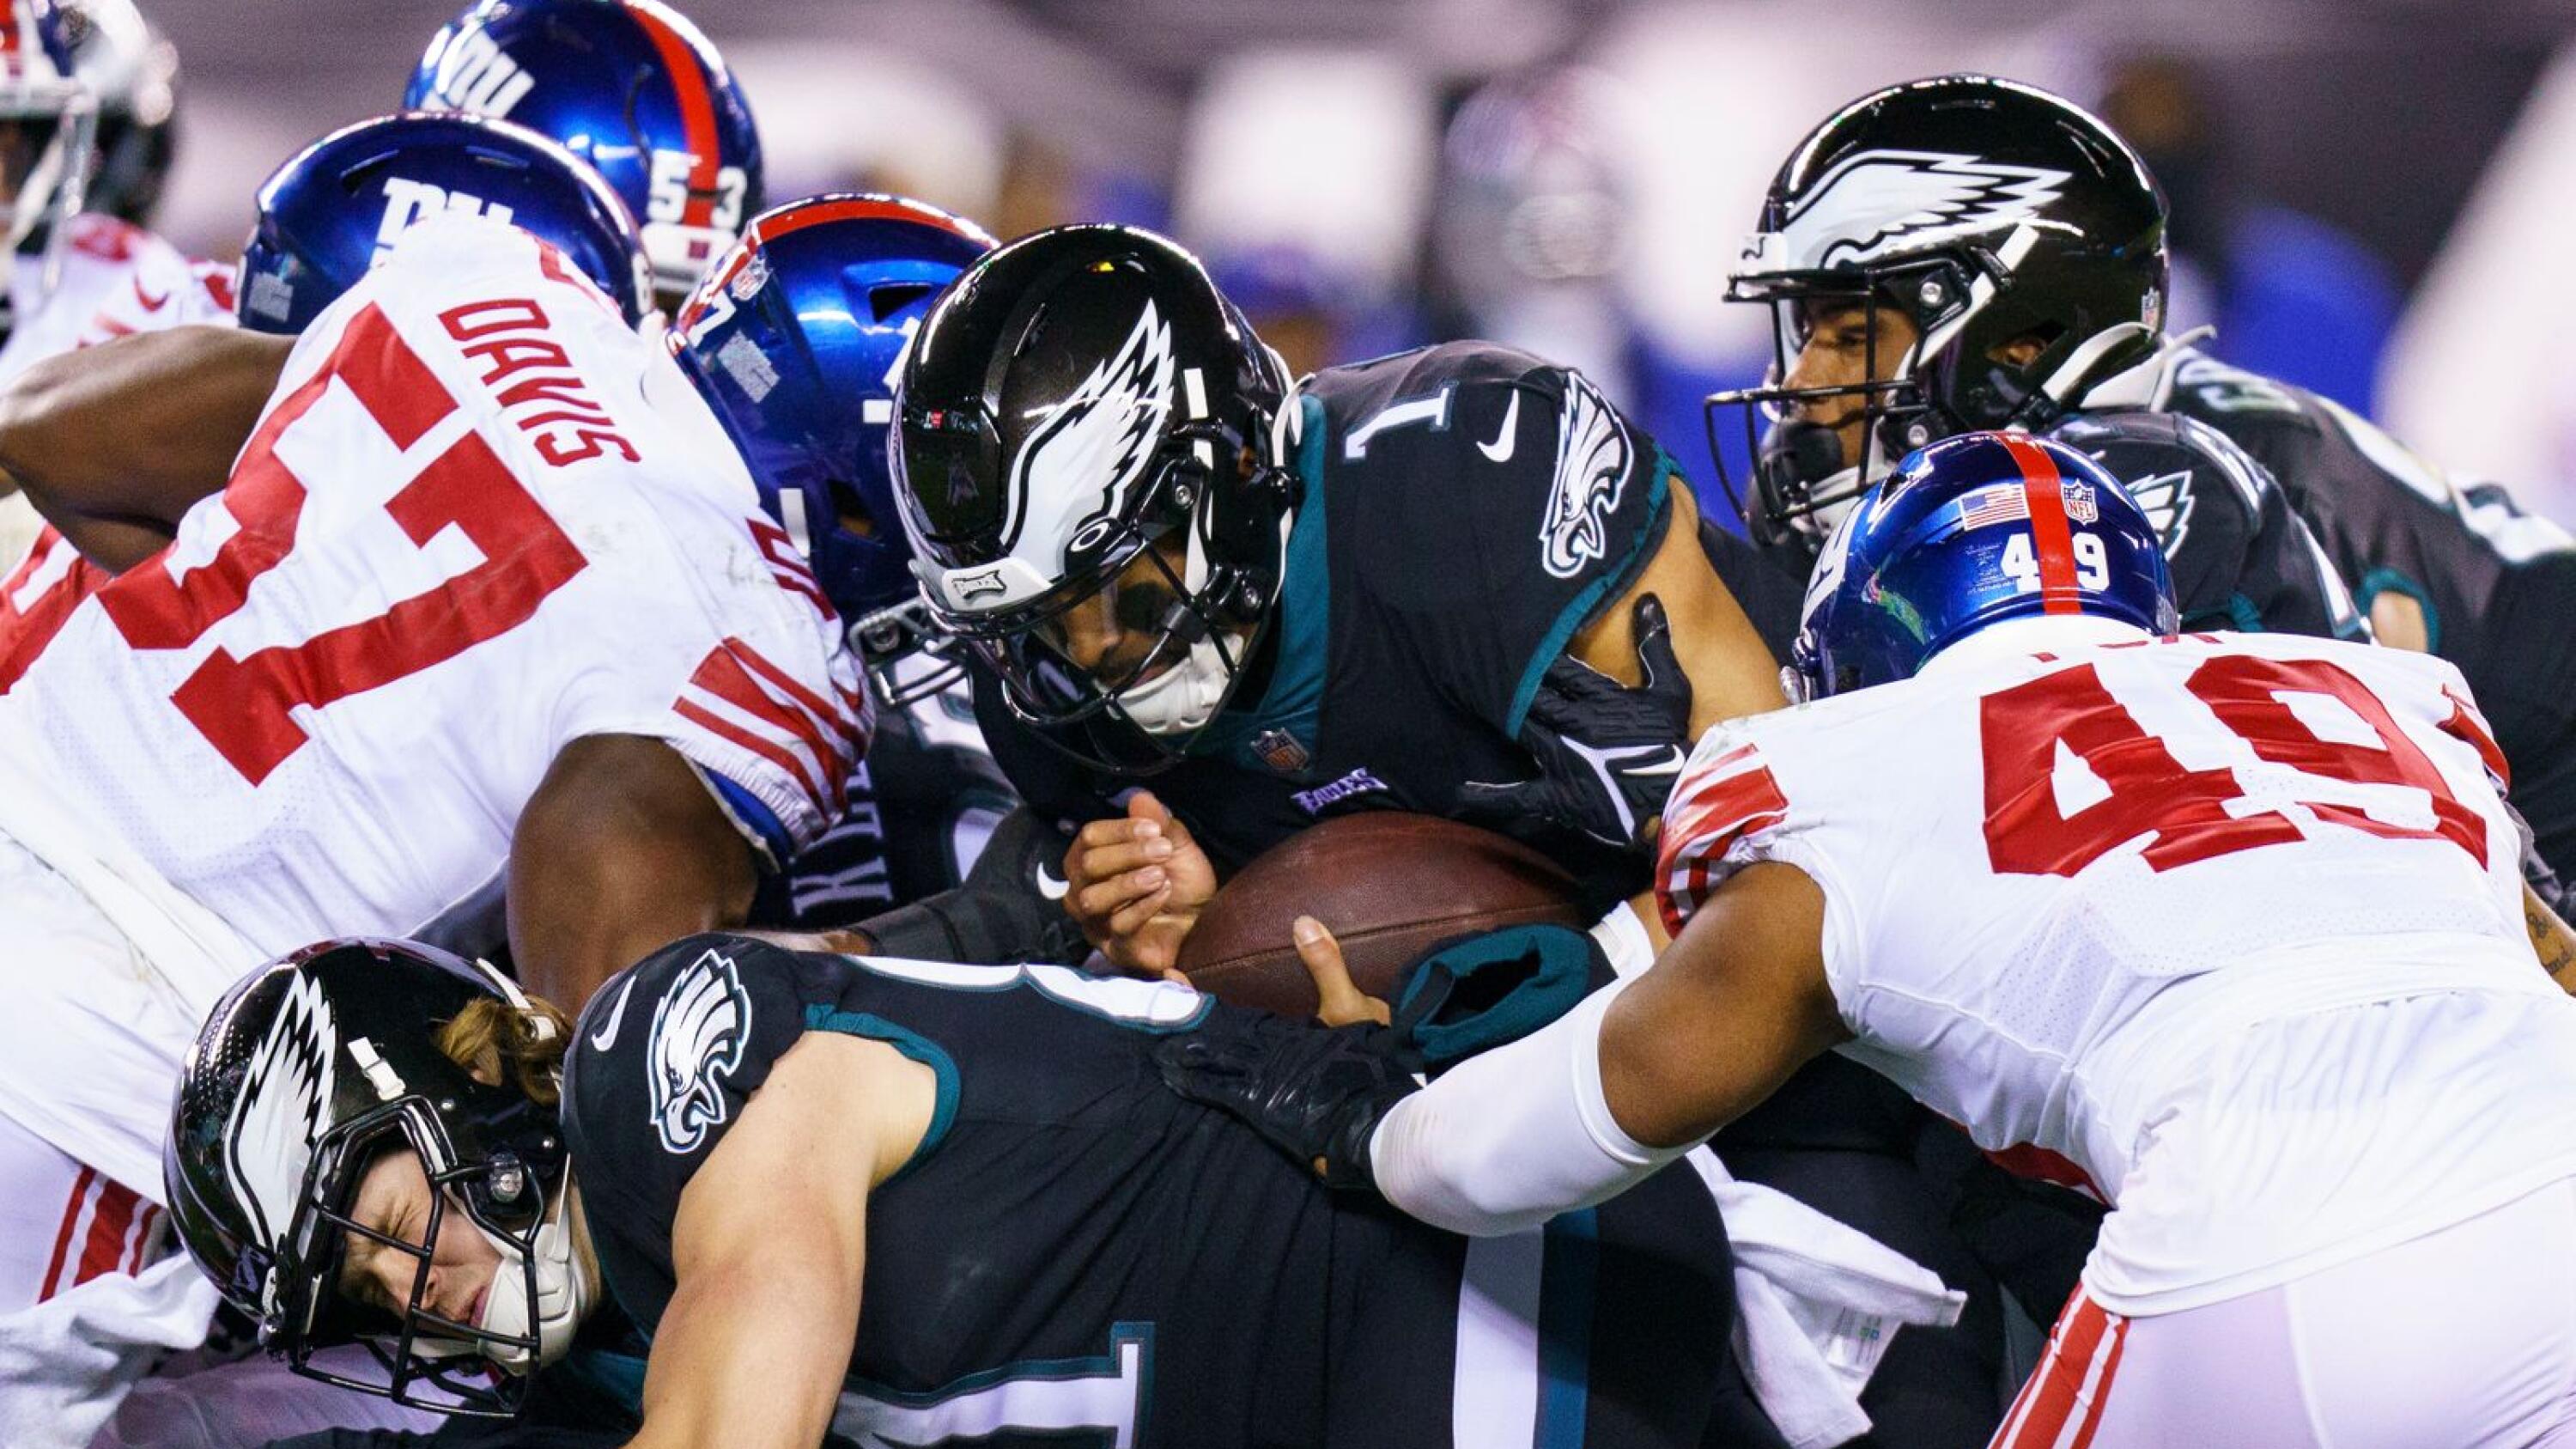 Eagles' Super Bowl aspirations start against Giants in Philly